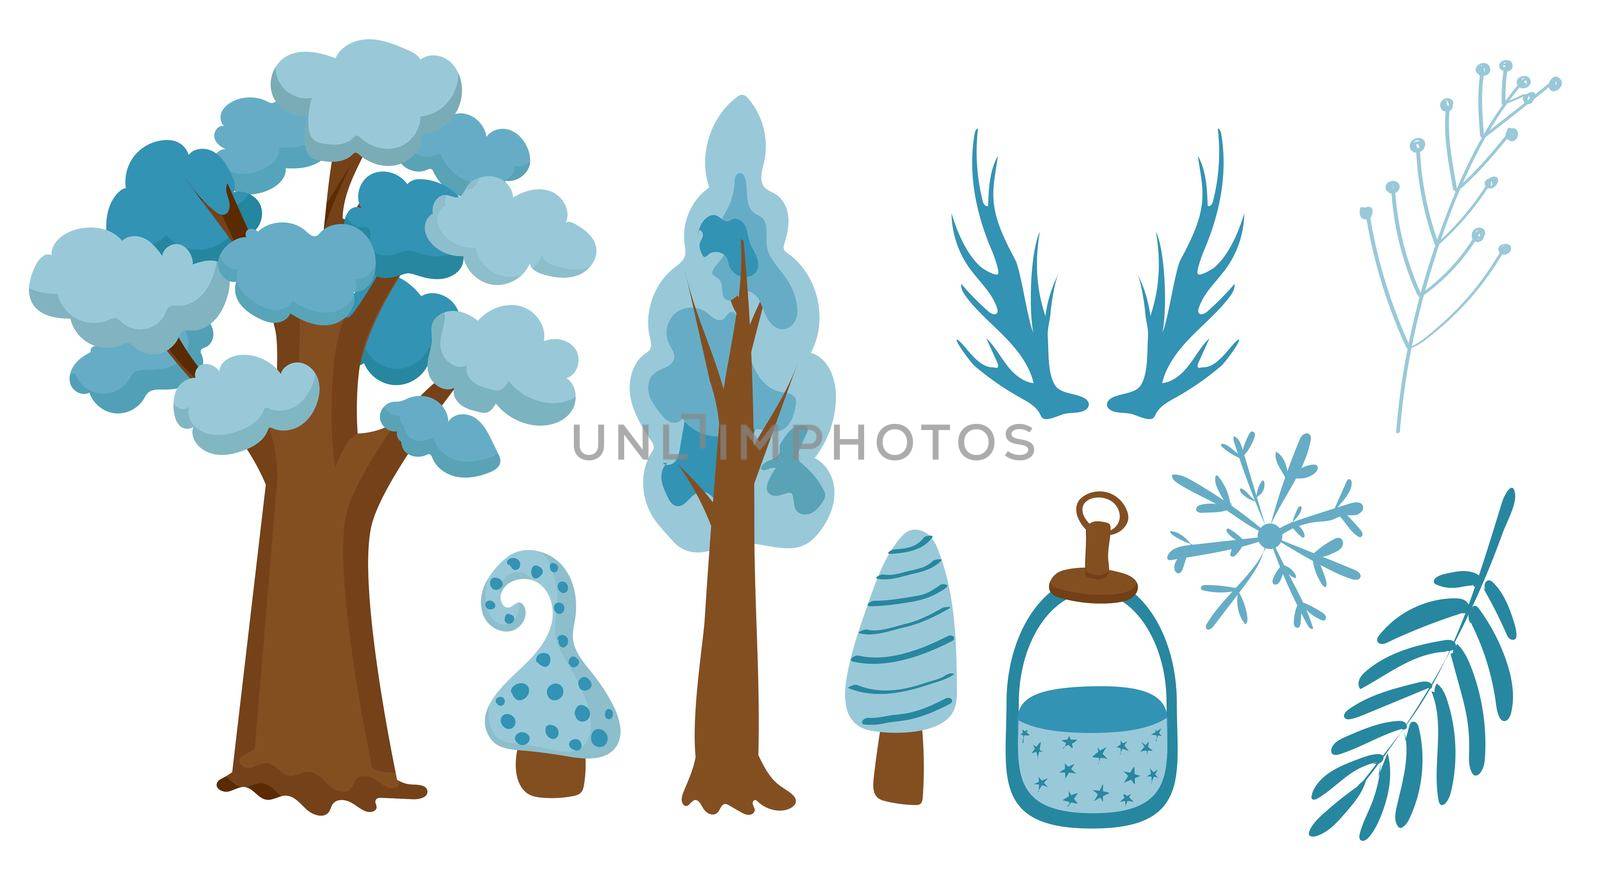 Elements for scrapbooking. Trees, leaves, deer antlers, lantern. Blue winter tree. Christmas mood. Isolated on white background.